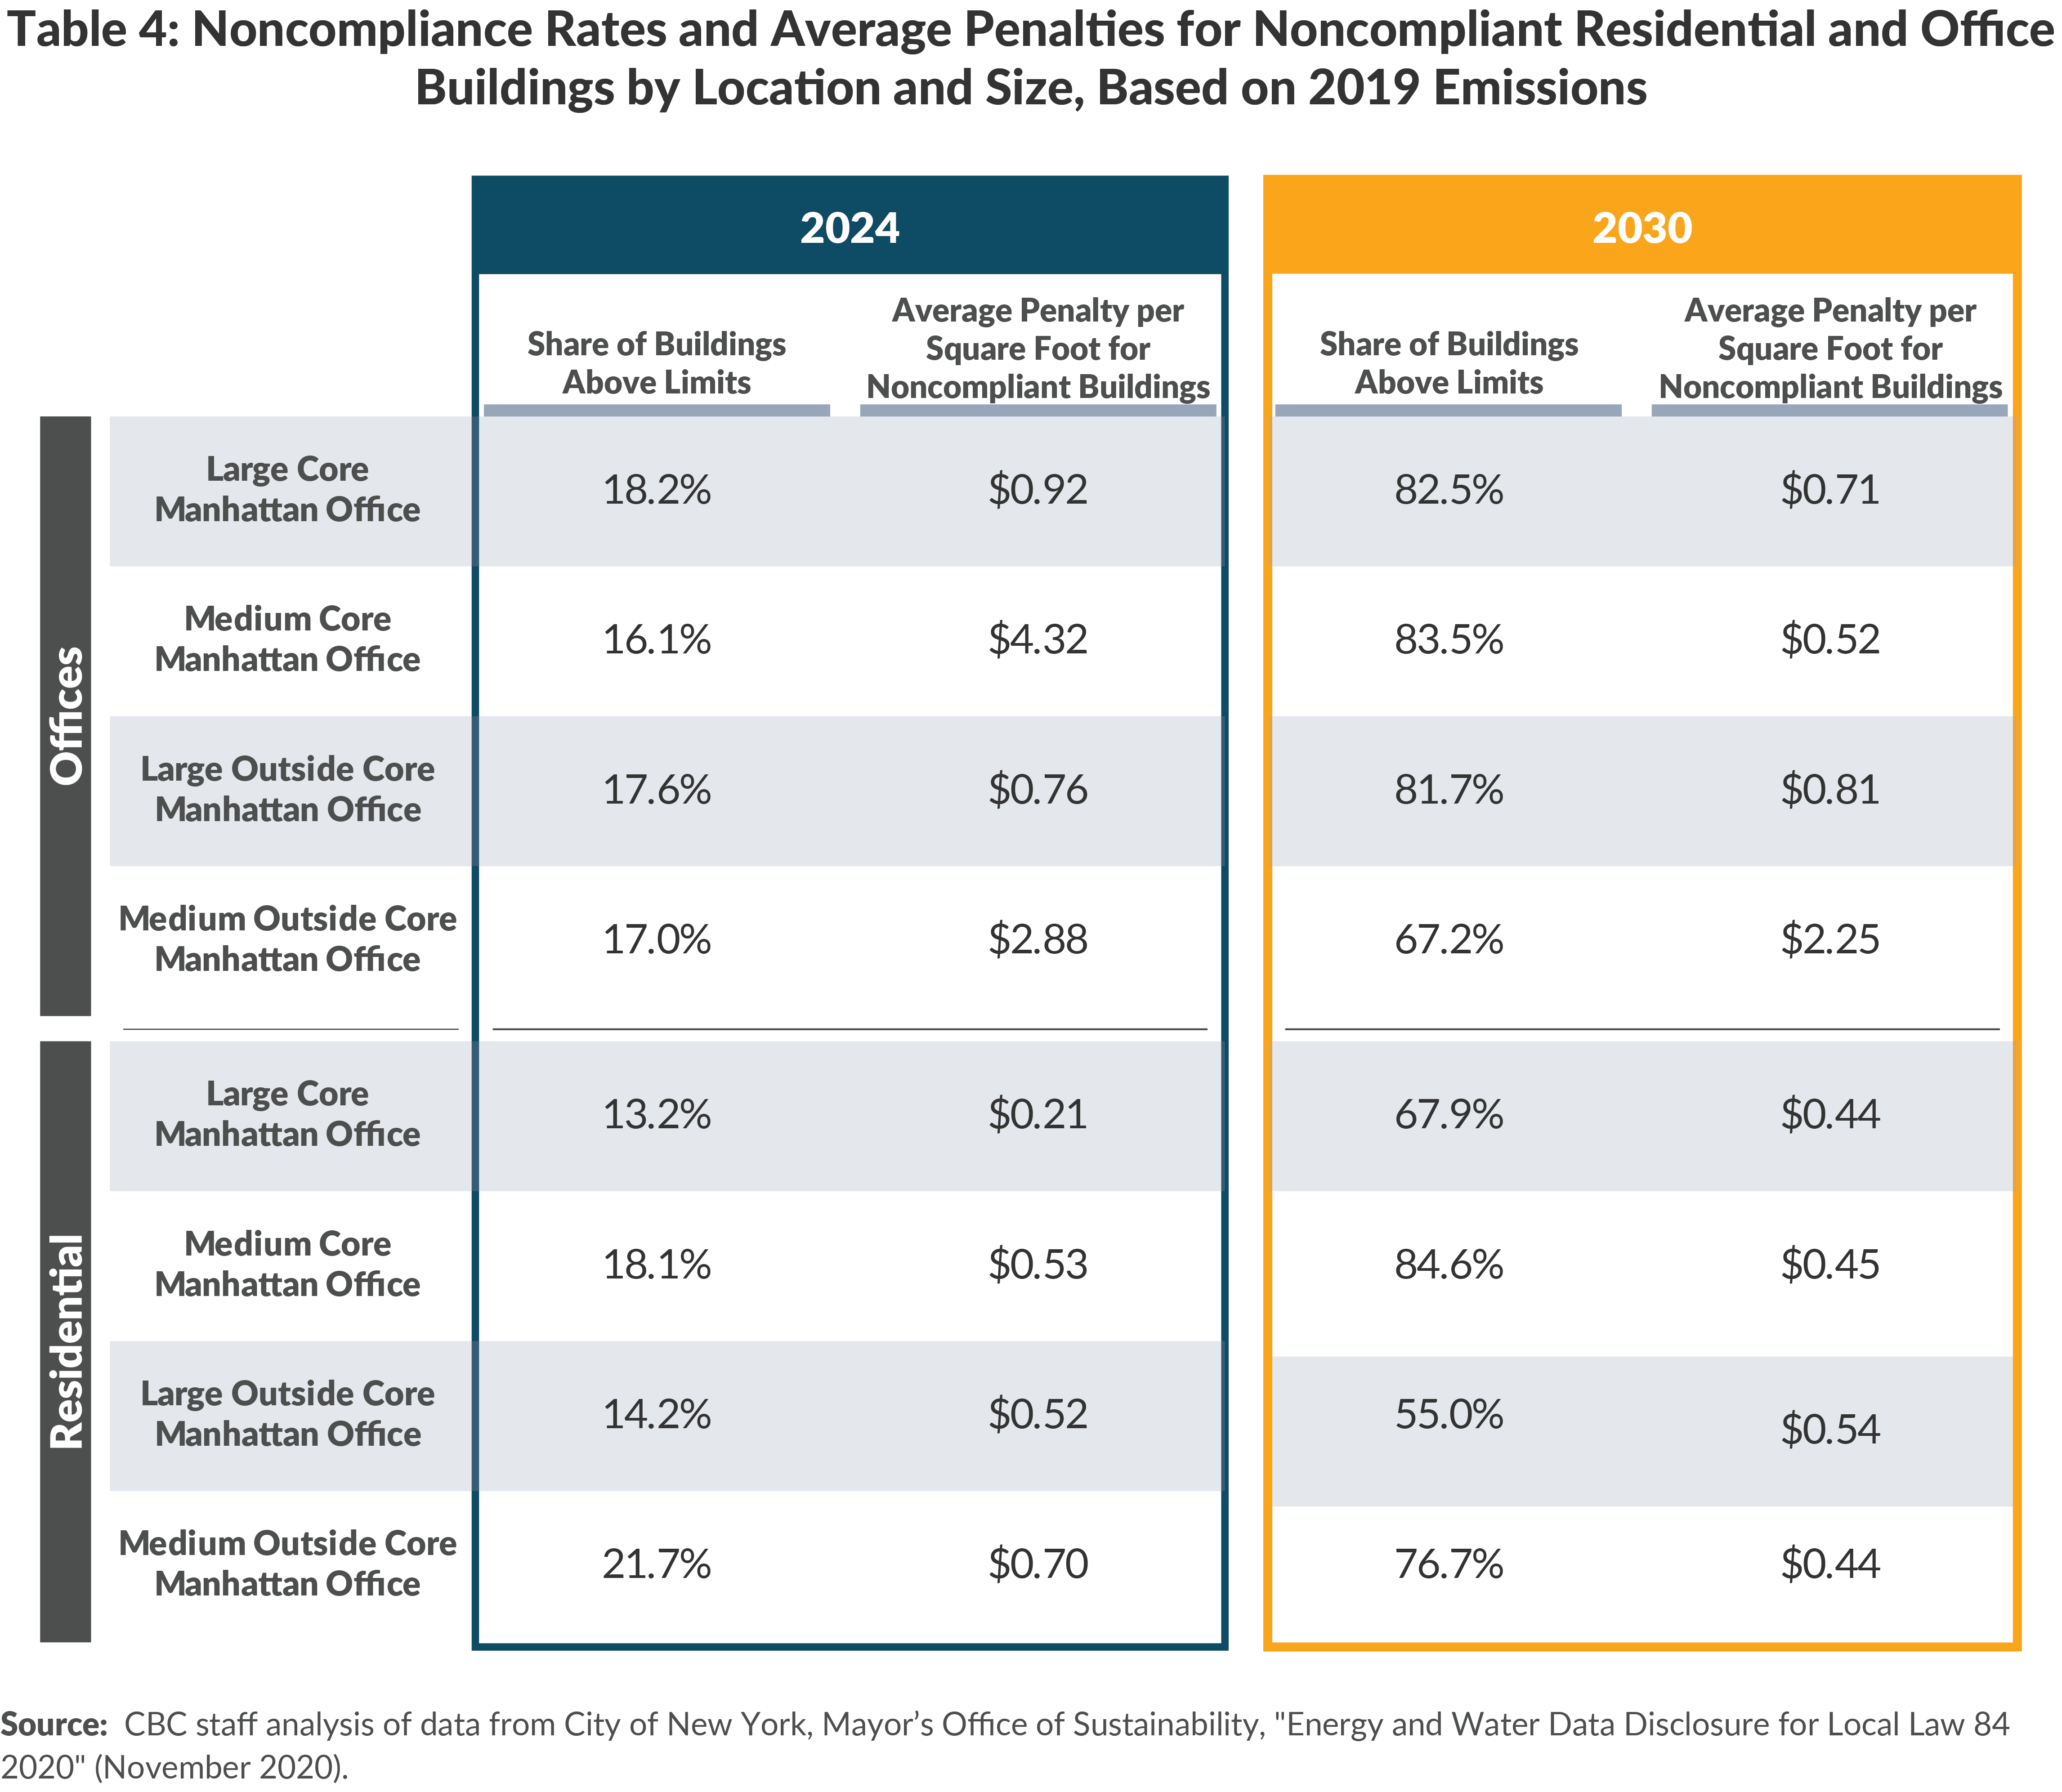 Table 4: Noncompliance Rates and Average Penalties for Noncompliant Residential and Office Buildings by Location and Size, Based on 2019 Emissions